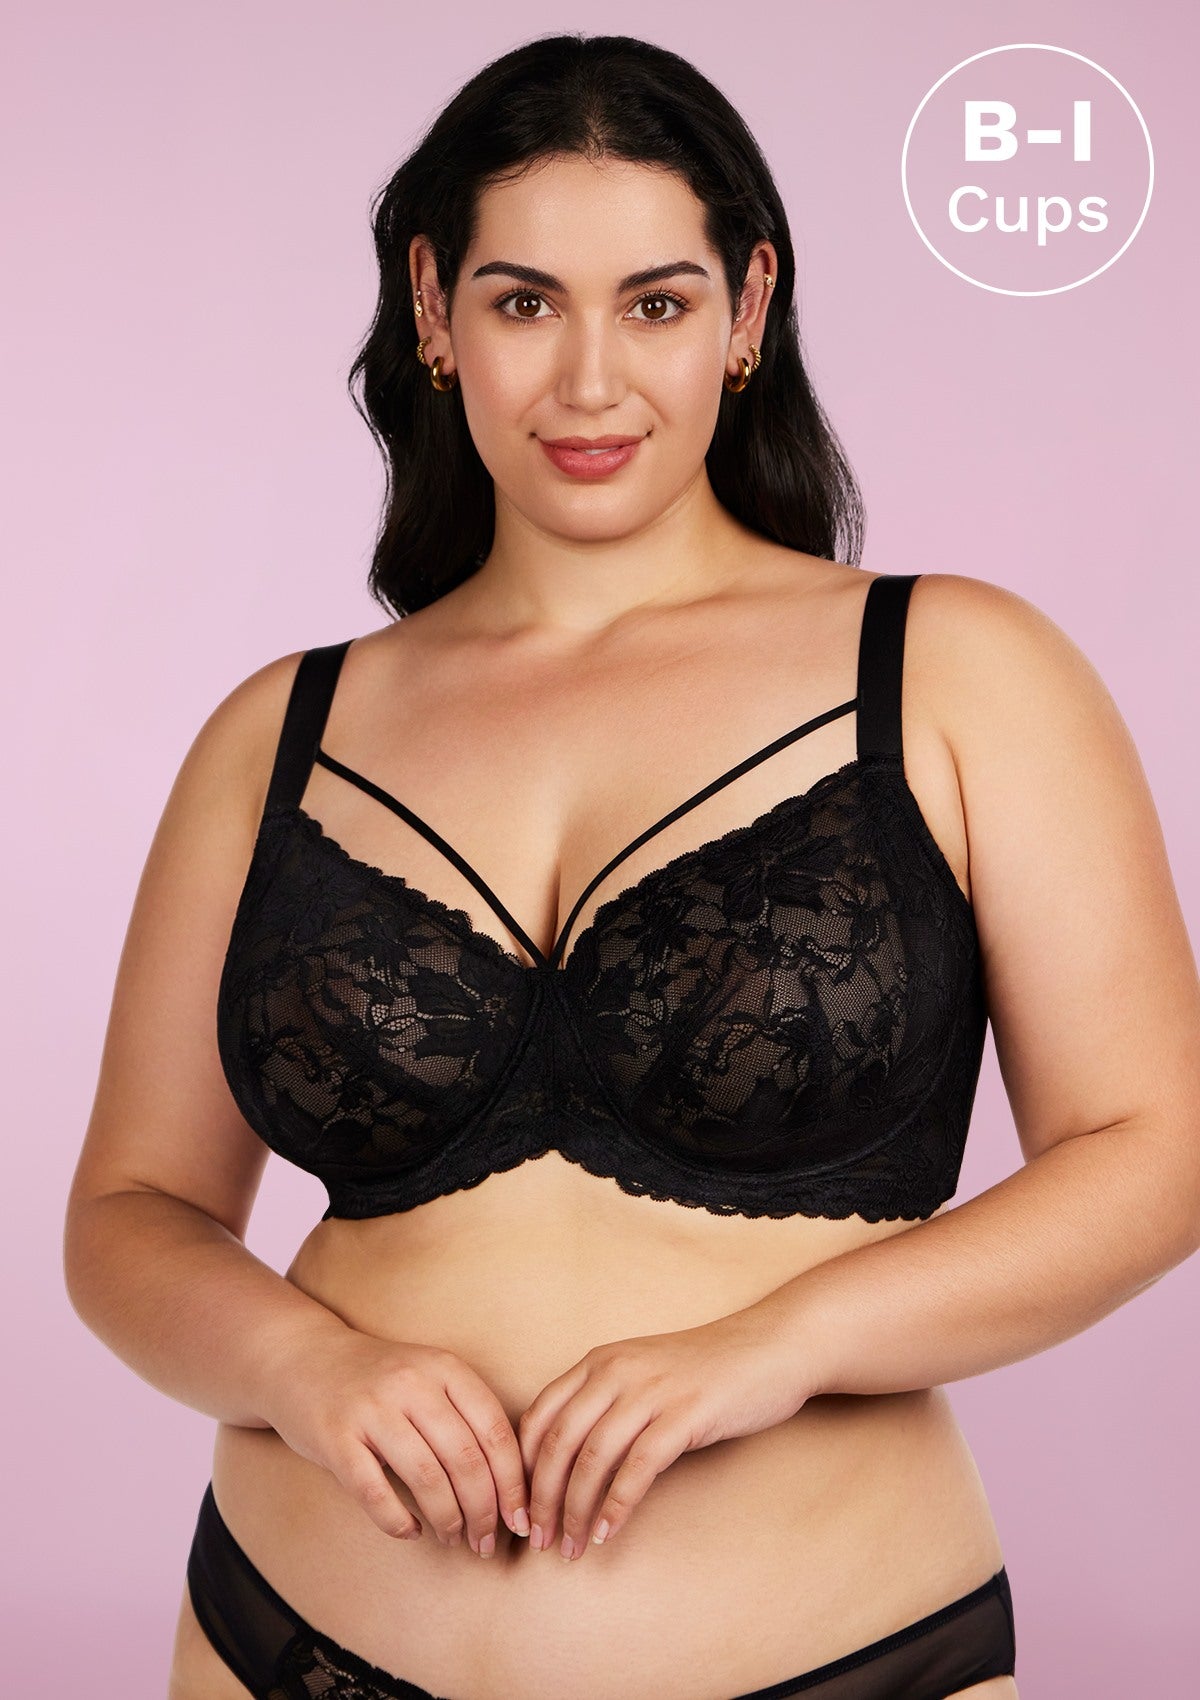 HSIA Pretty In Petals Lace Bra And Panty Set: Non Padded Wired Bra - Black / 32 / G